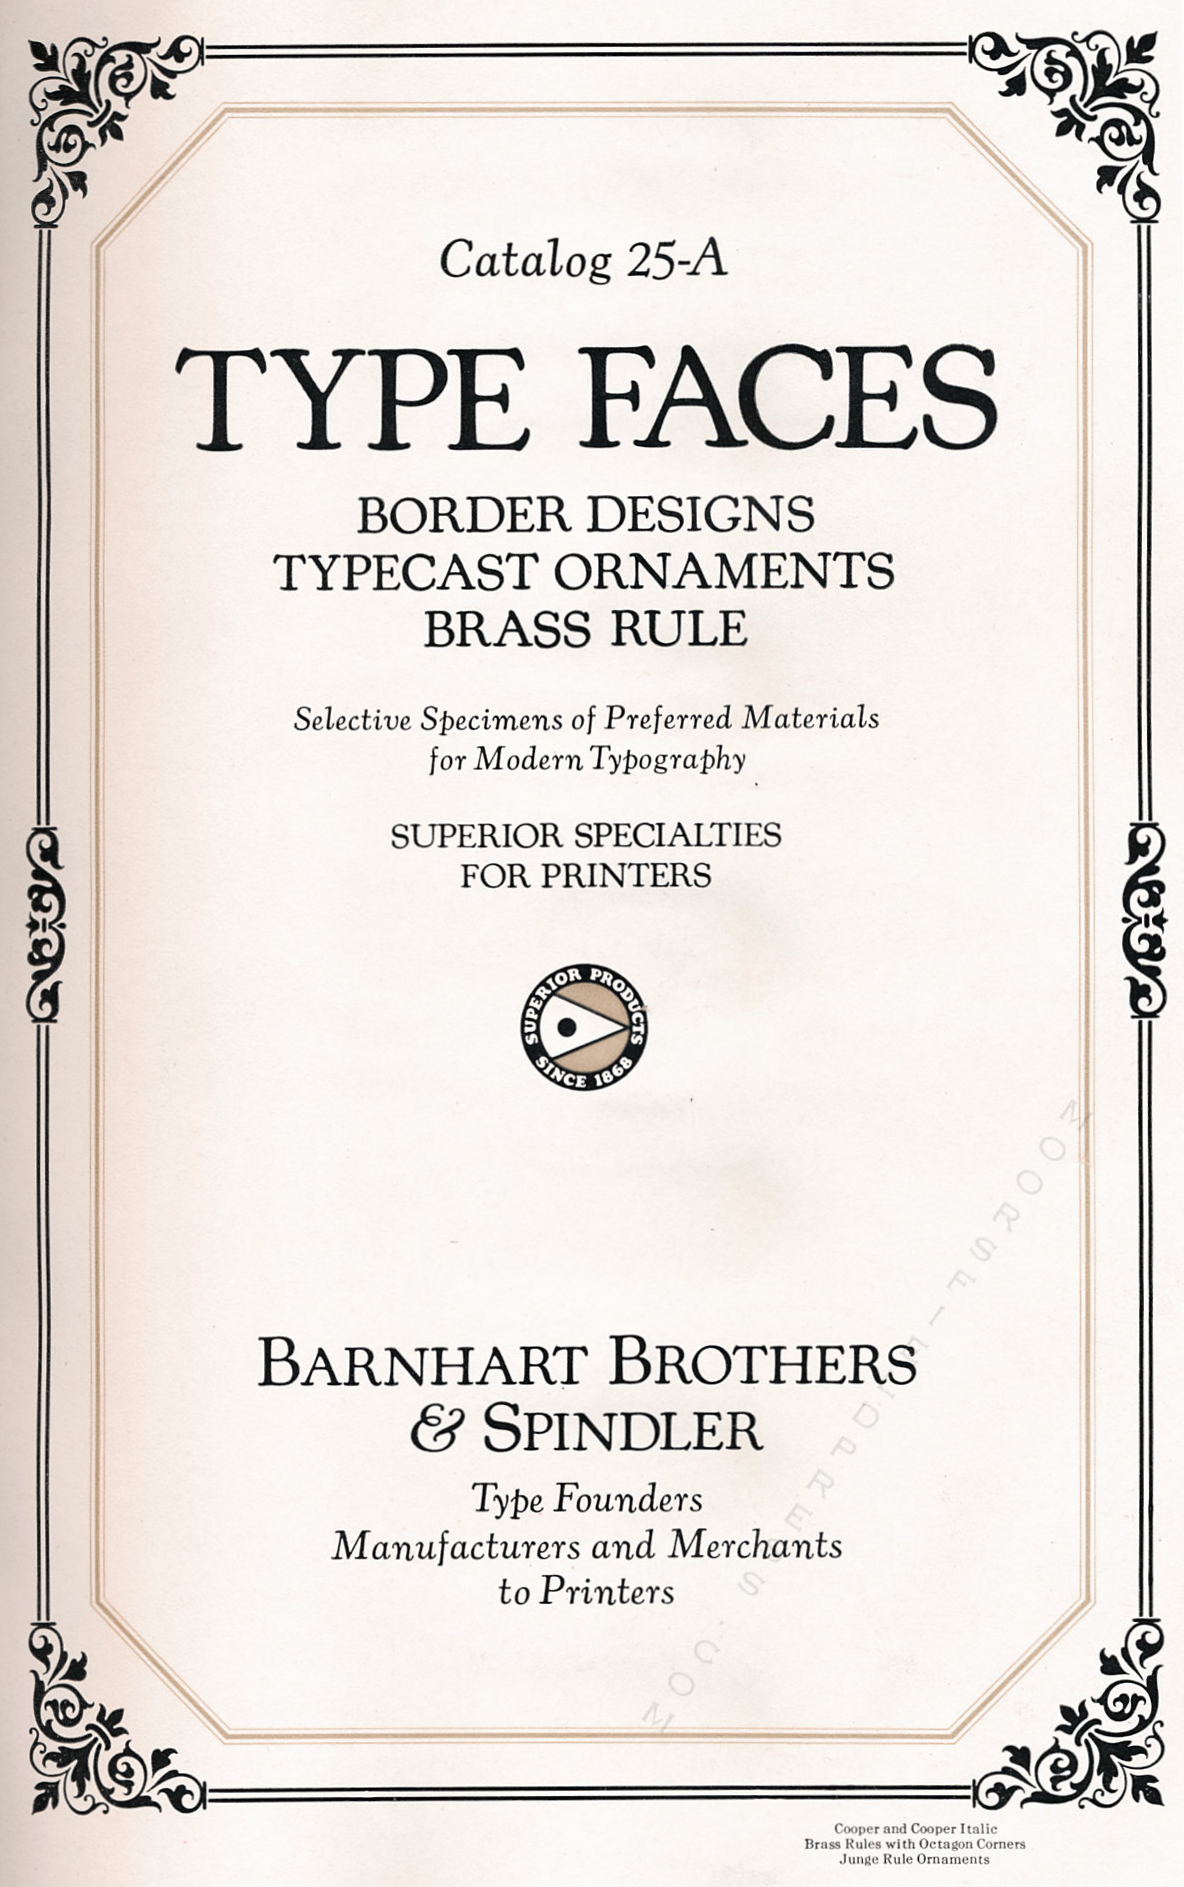 Caslon Font
              Typeface Catalog owned by Winfred Porter Truesdell